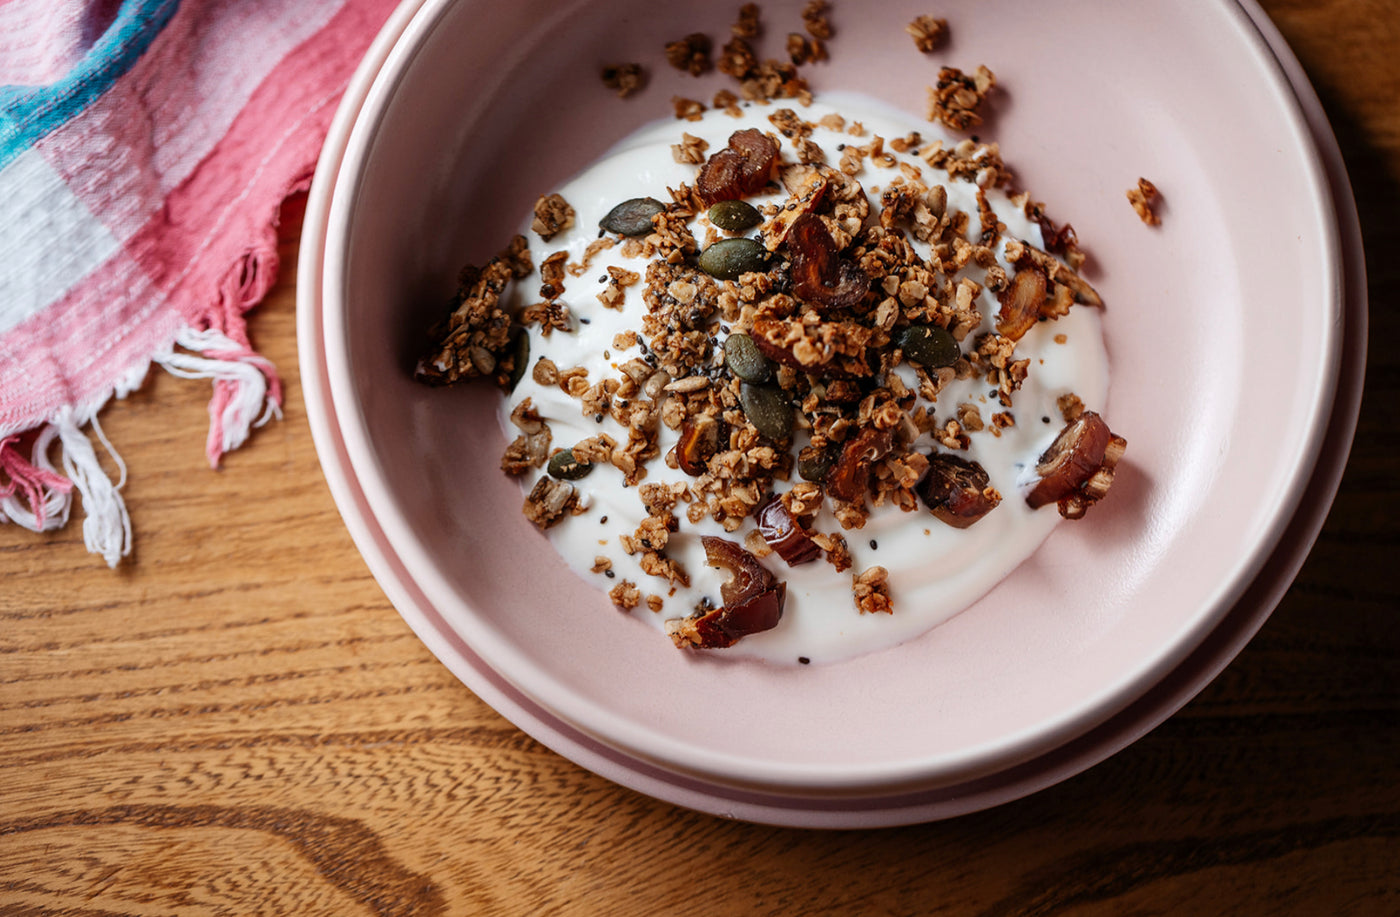 A bowl of Greek yoghourt and Just So Good’s Almond & Date granola. Made with oats, whole almonds, organic sunflower & pumpkin seeds, chia seeds, dates, mixed spice, organic honey, organic virgin coconut oil. A high fibre, nutritious breakfast.